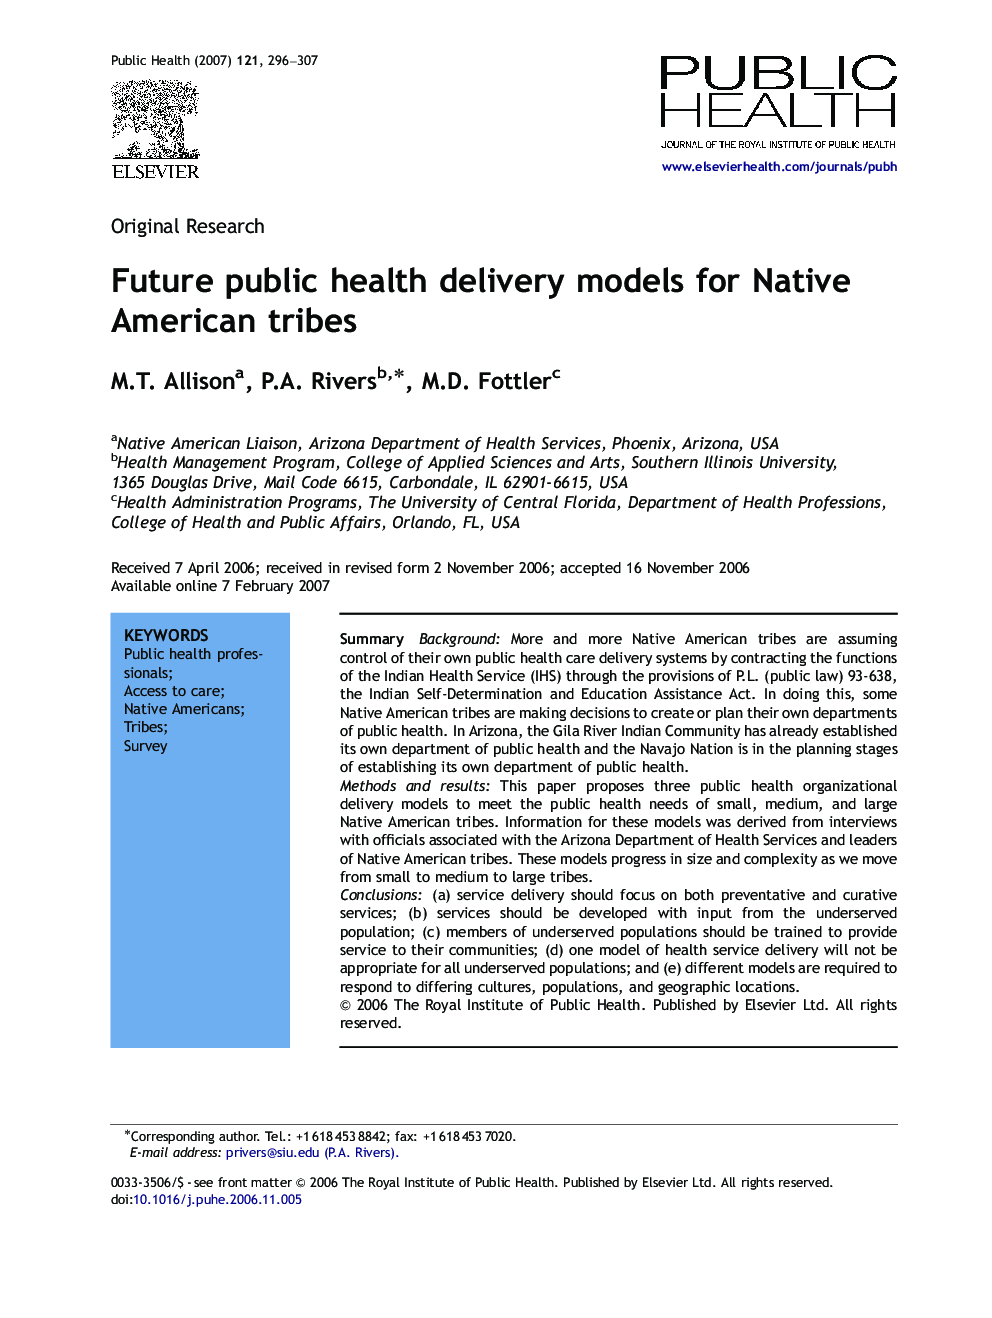 Future public health delivery models for Native American tribes